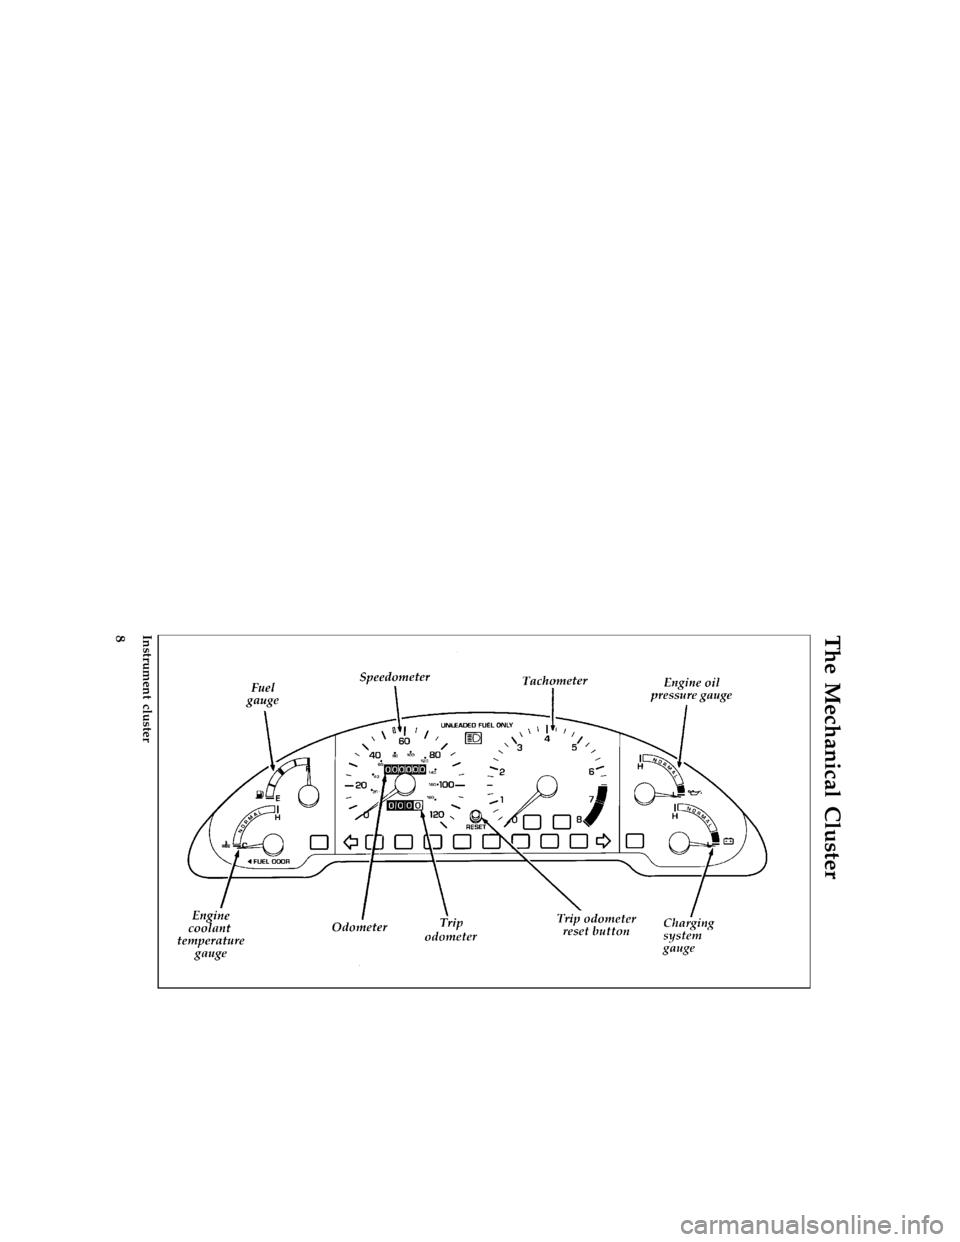 FORD PROBE 1997 2.G User Guide 8
%*
[IS01000(ALL)01/96]
The Mechanical Cluster
[IS01100(ALL)05/96]
full page art:0032080-B
Instrument cluster
File:03prisp.ex
Update:Thu May 16 09:43:45 1996 